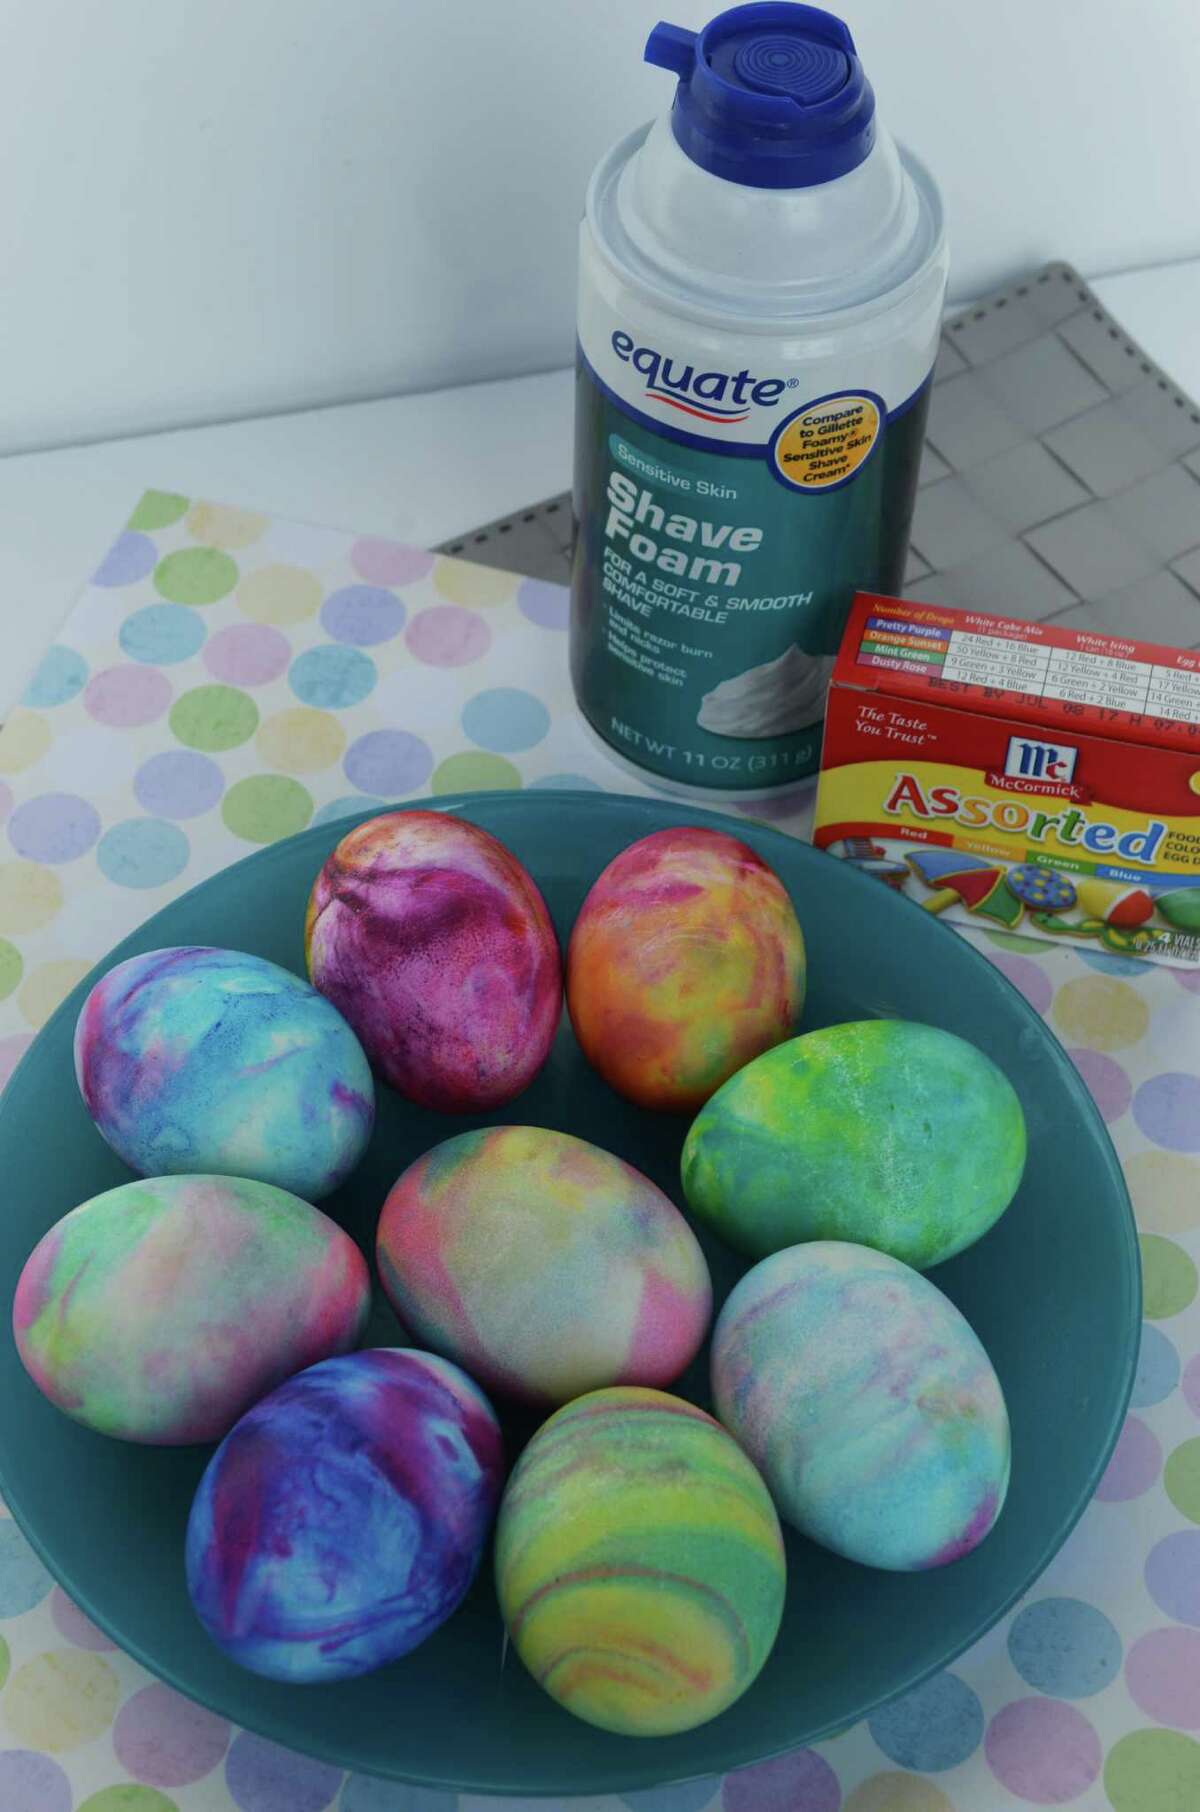 Frothy fun: dyeing Easter eggs in shaving cream